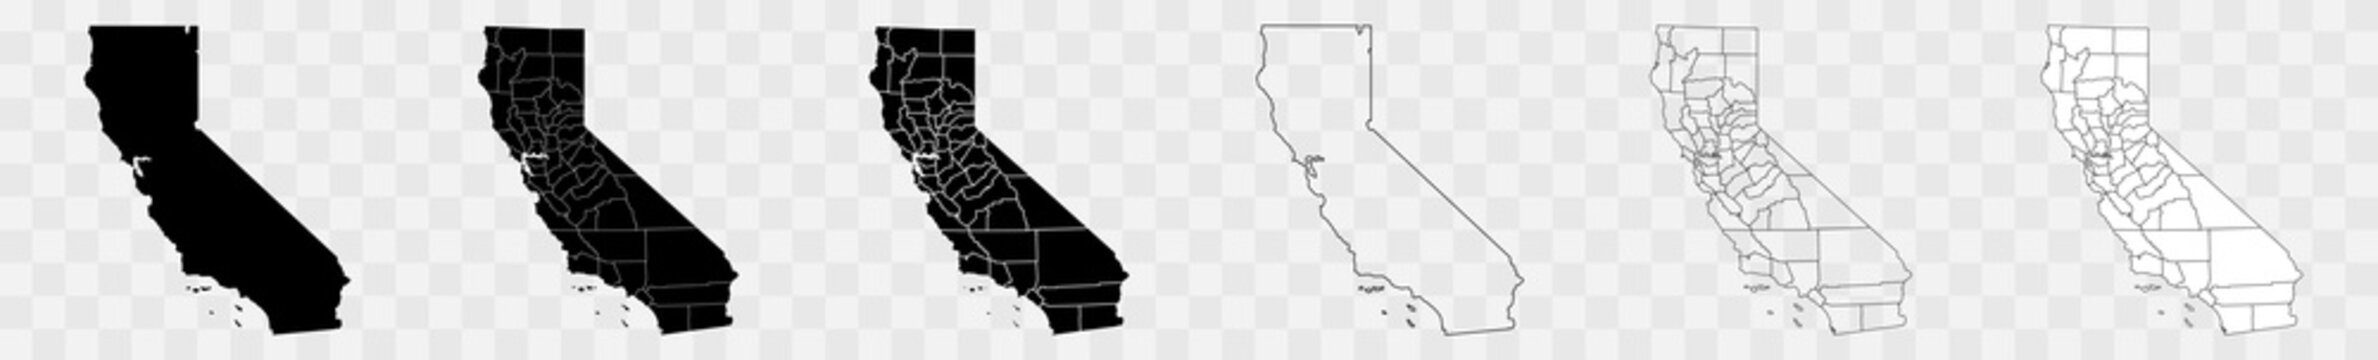 California Counties Map Black | State County Border | United States | US America | Transparent Isolated | Variations